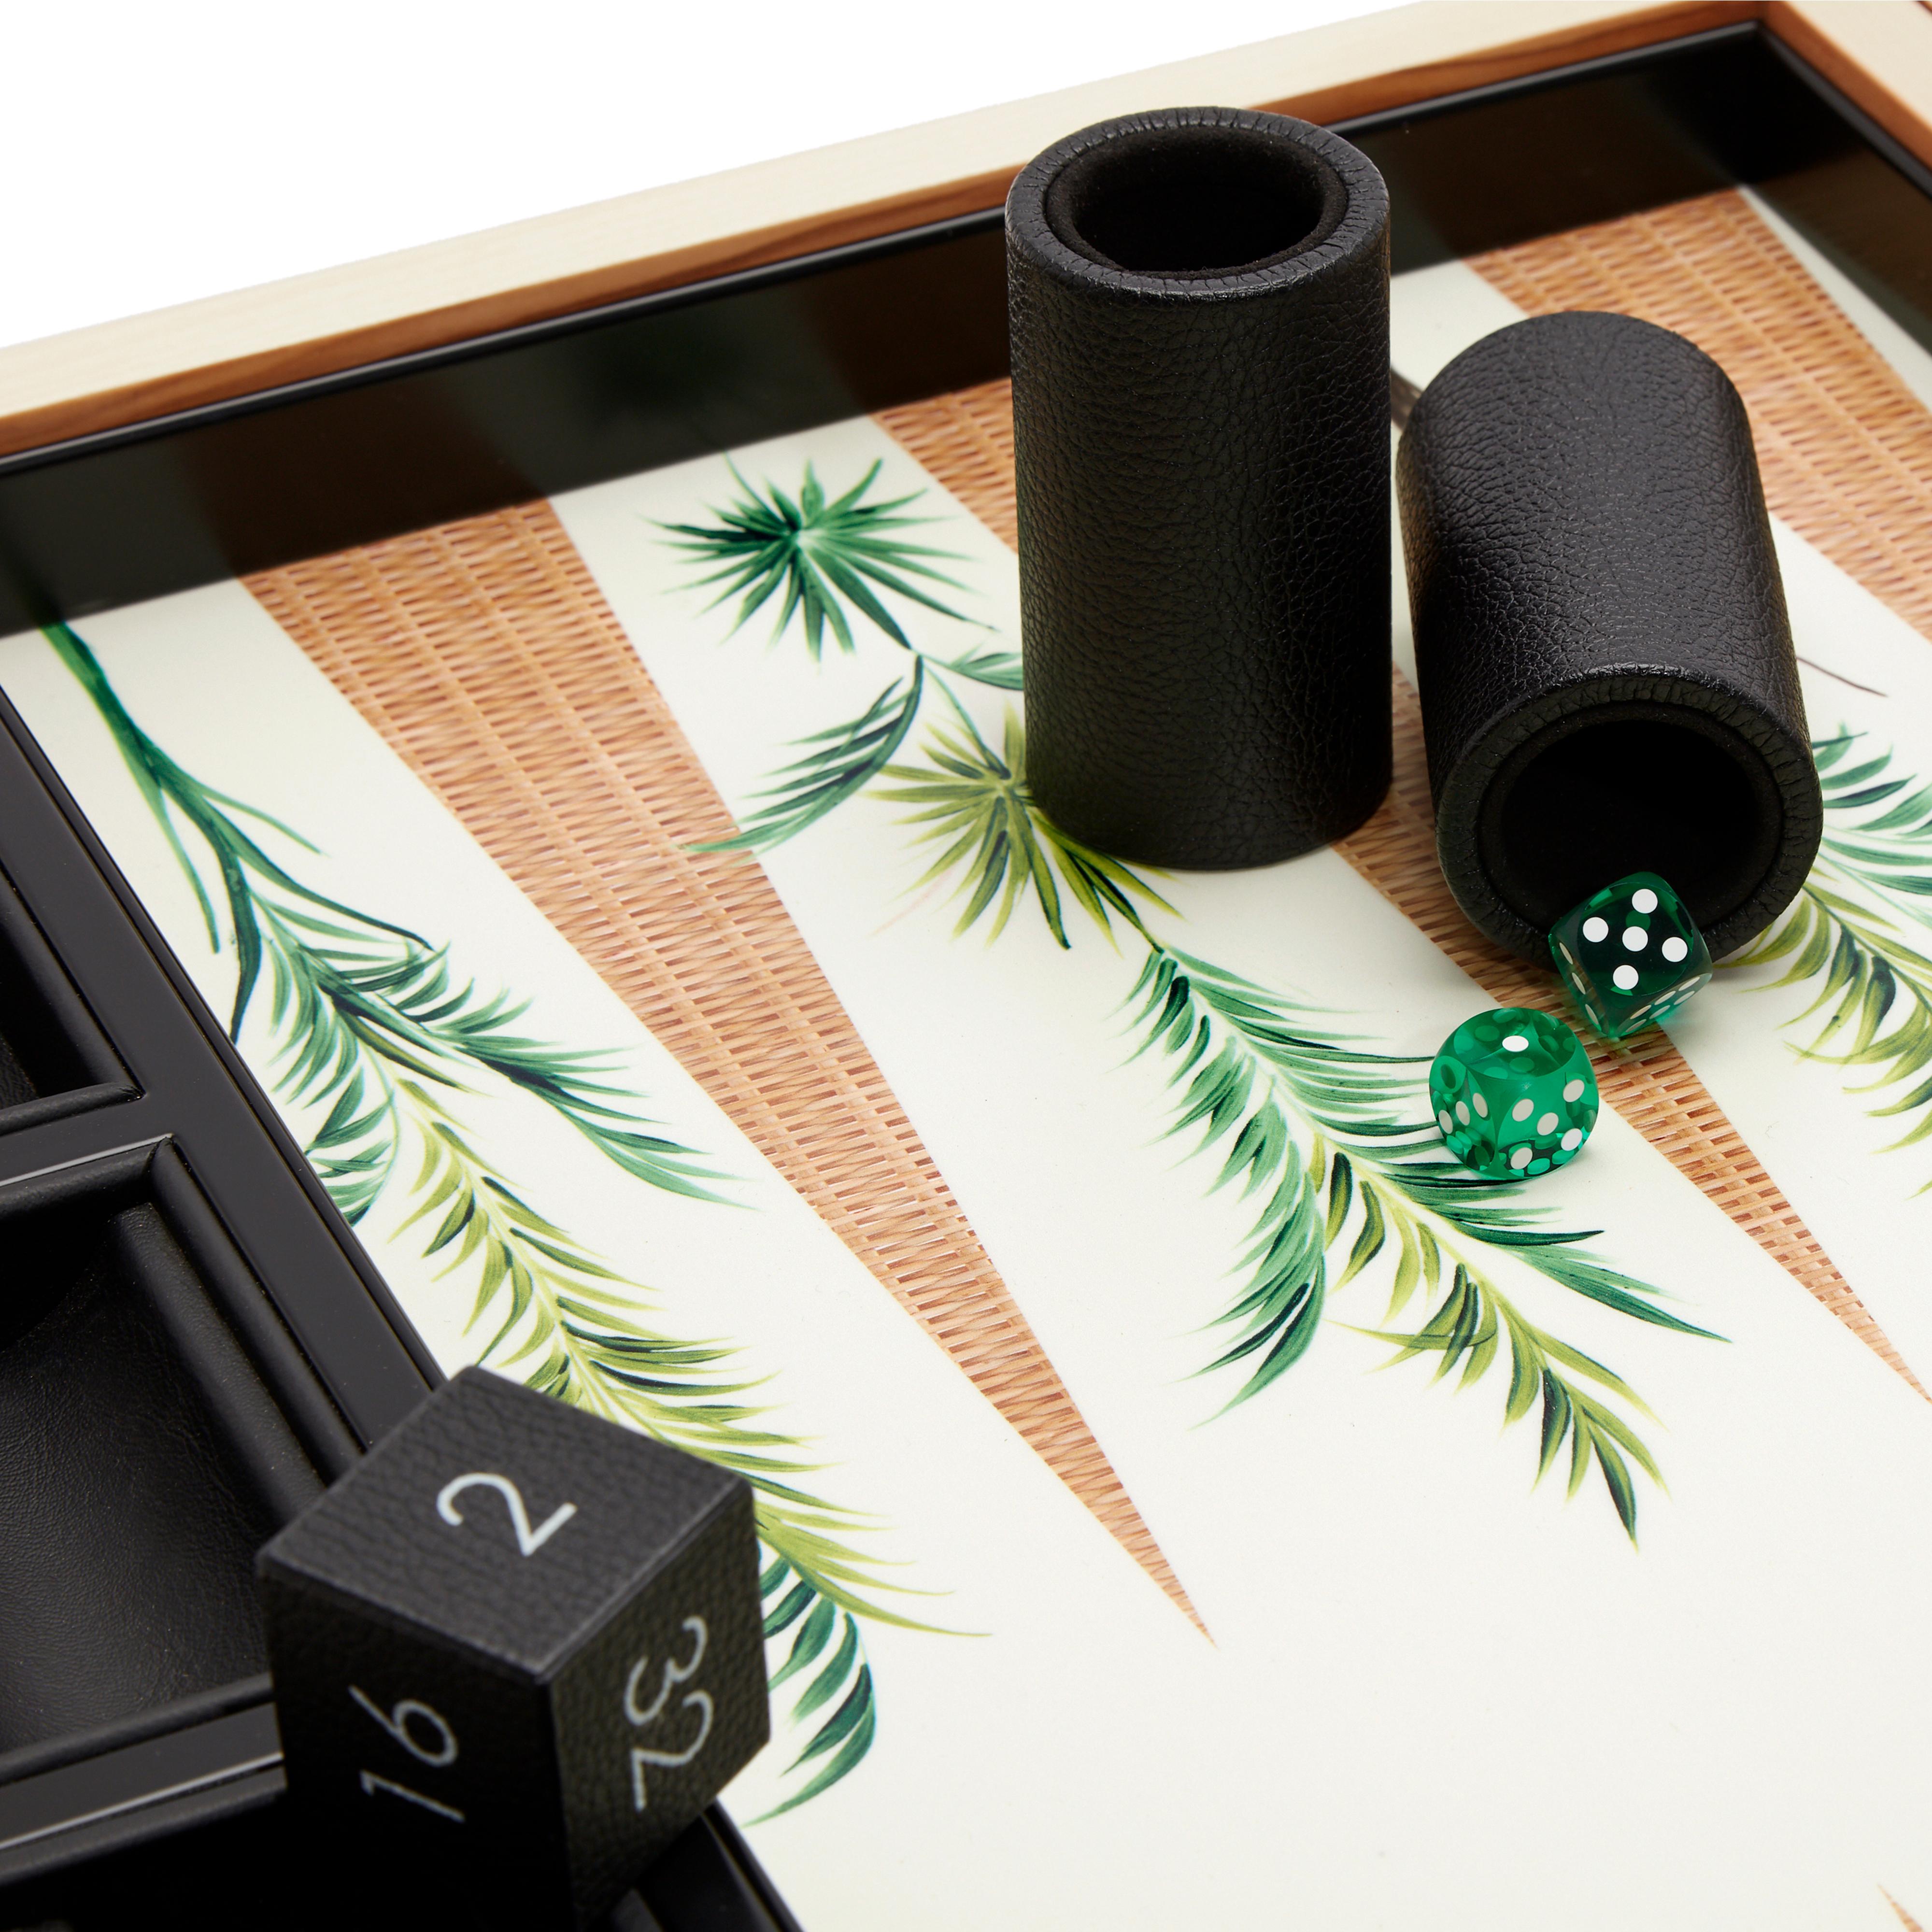 This design conjures up every player’s dream of sitting in the shade of palm fronds with a day of backgammon ahead. Palm is part of Alexandra Llewellyn’s signature collection of hand-painted and hand crafted backgammons. The London based artist has